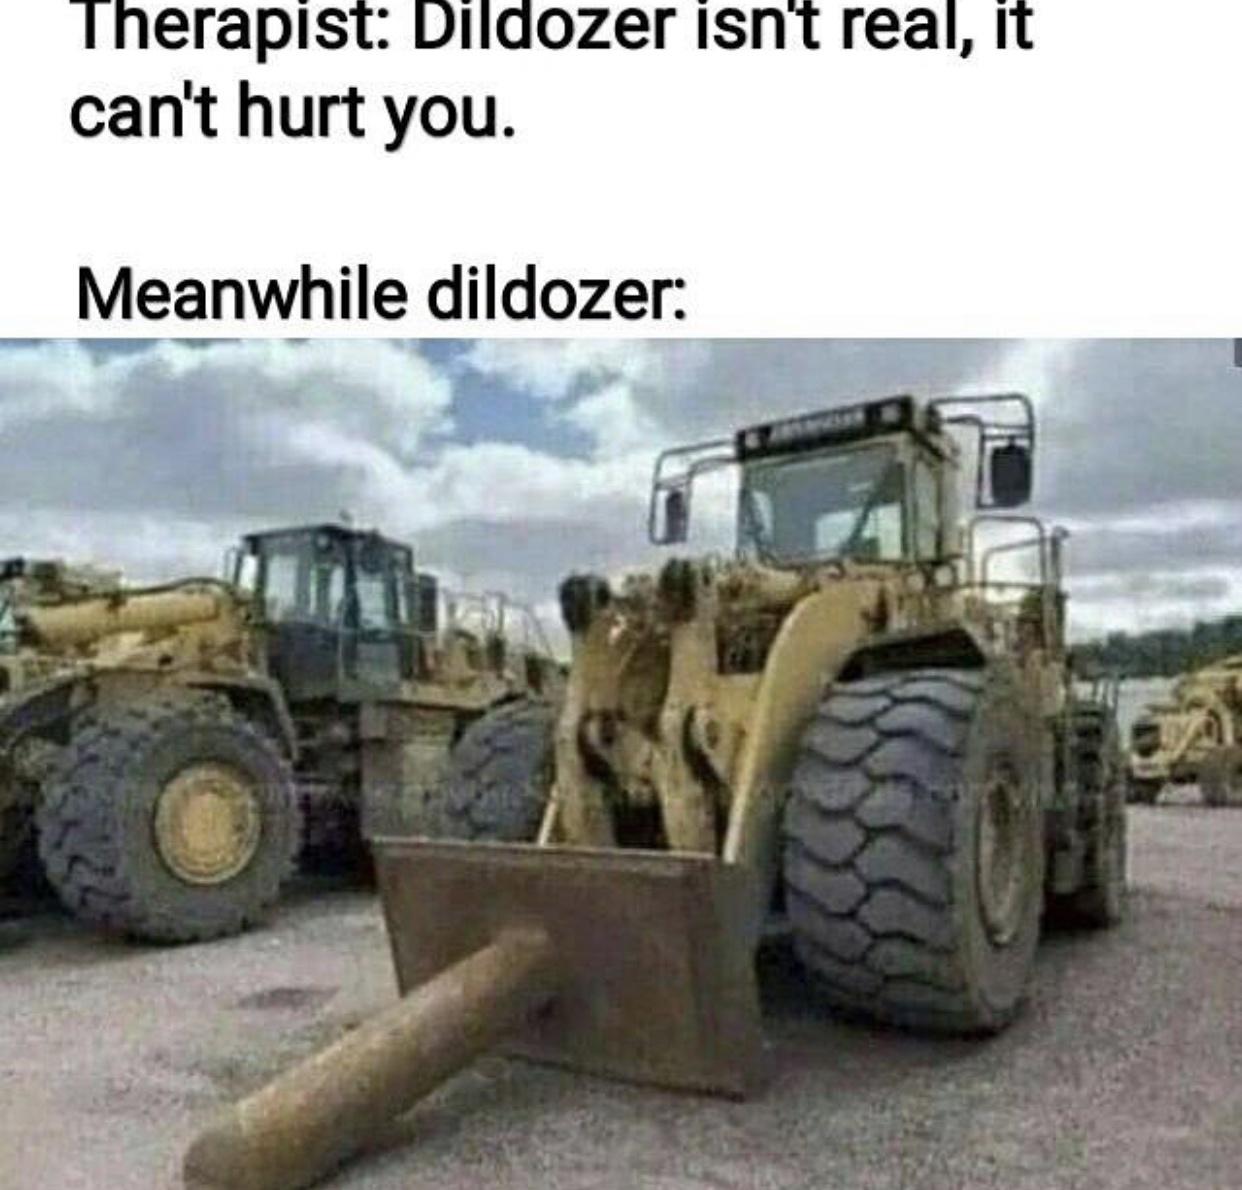 Therapist Dildozer isn't real, it can't hurt you. Meanwhile dildozer